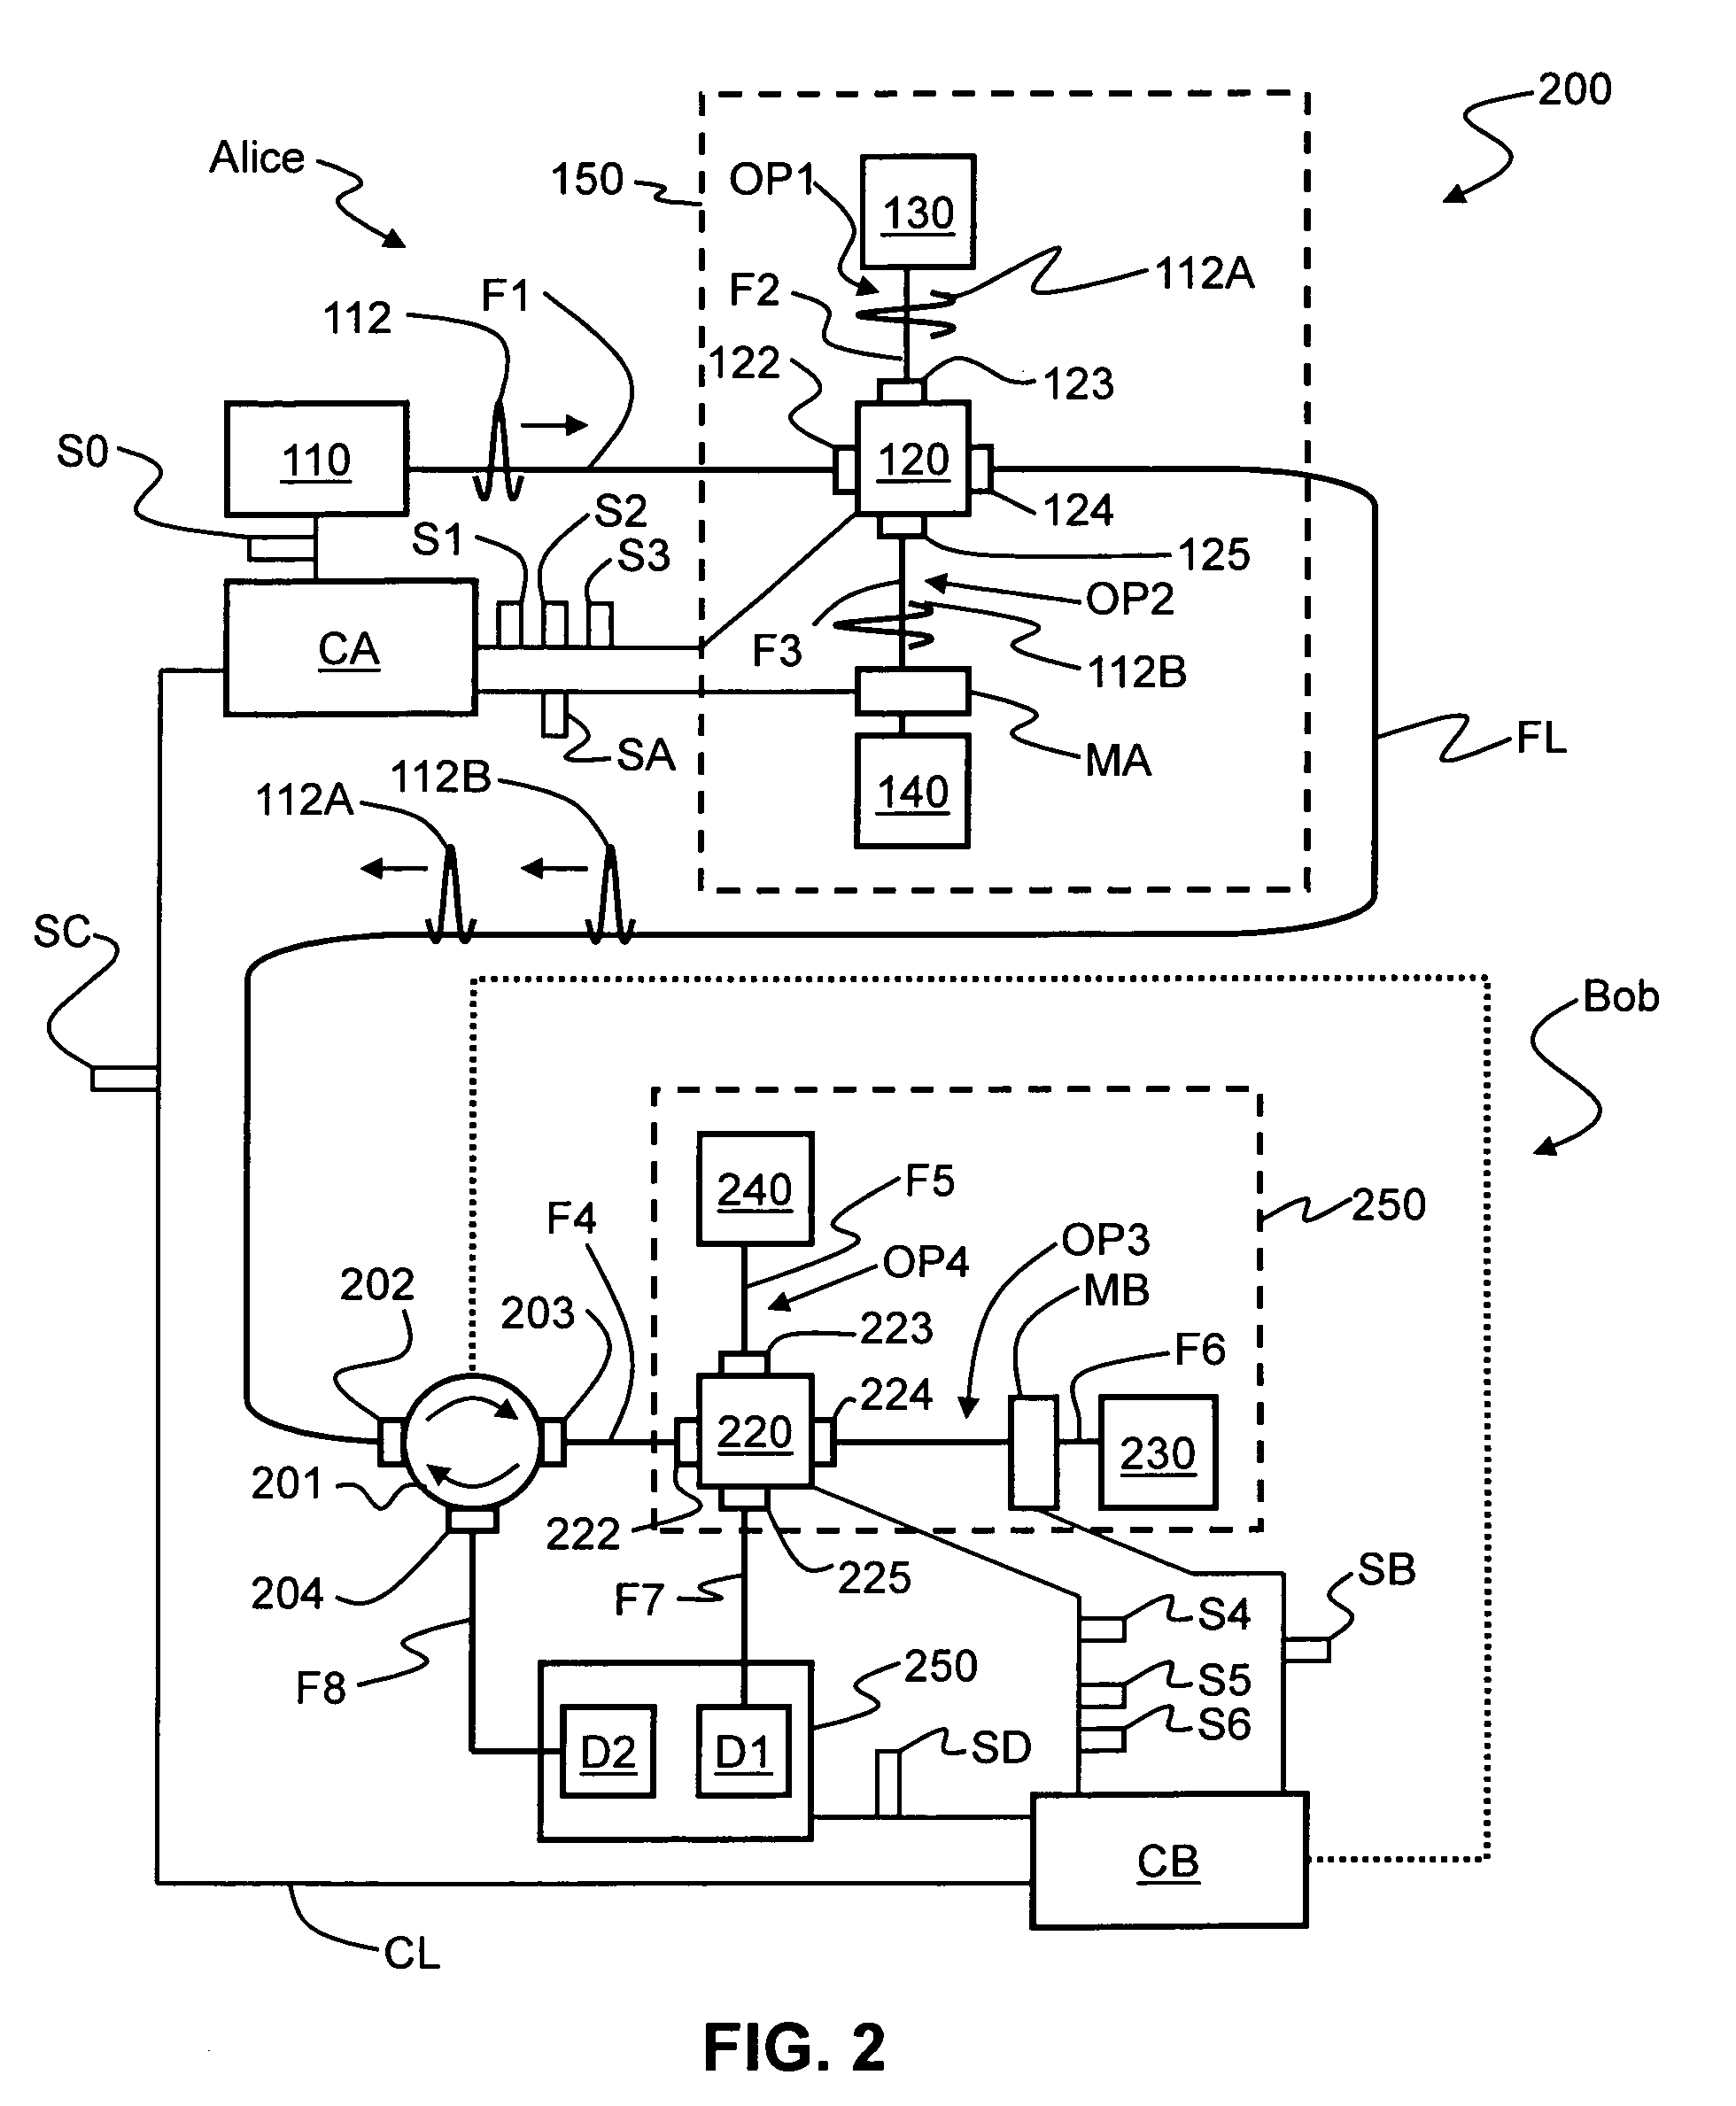 Qkd stations with fast optical switches and qkd systems using same